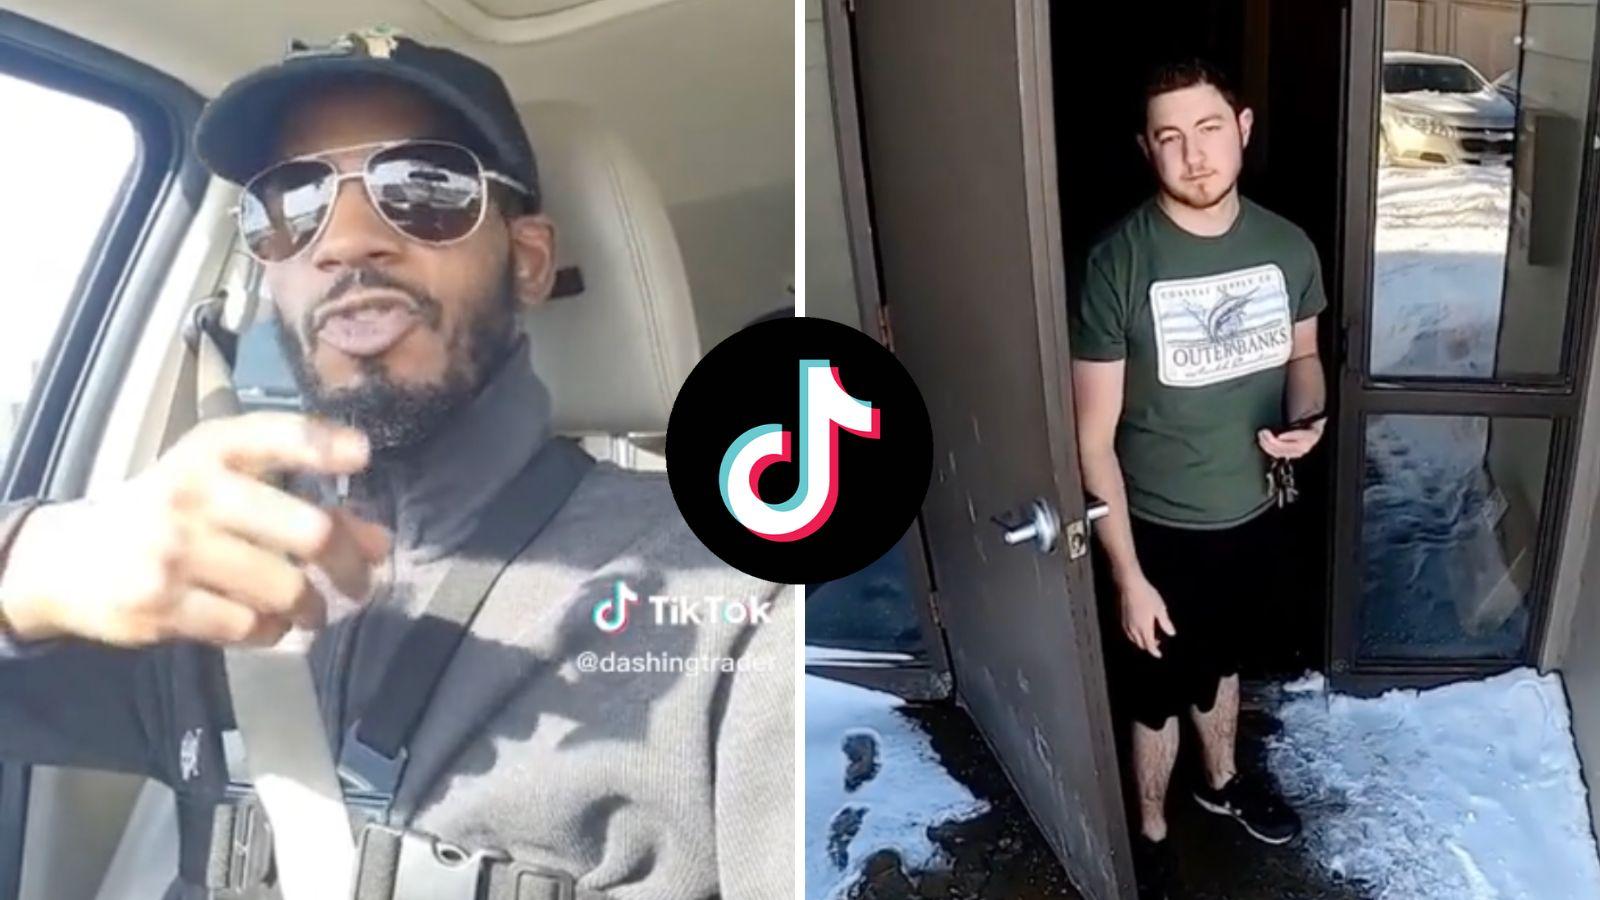 DoorDash driver divides viewers as he confronts customers who don’t tip